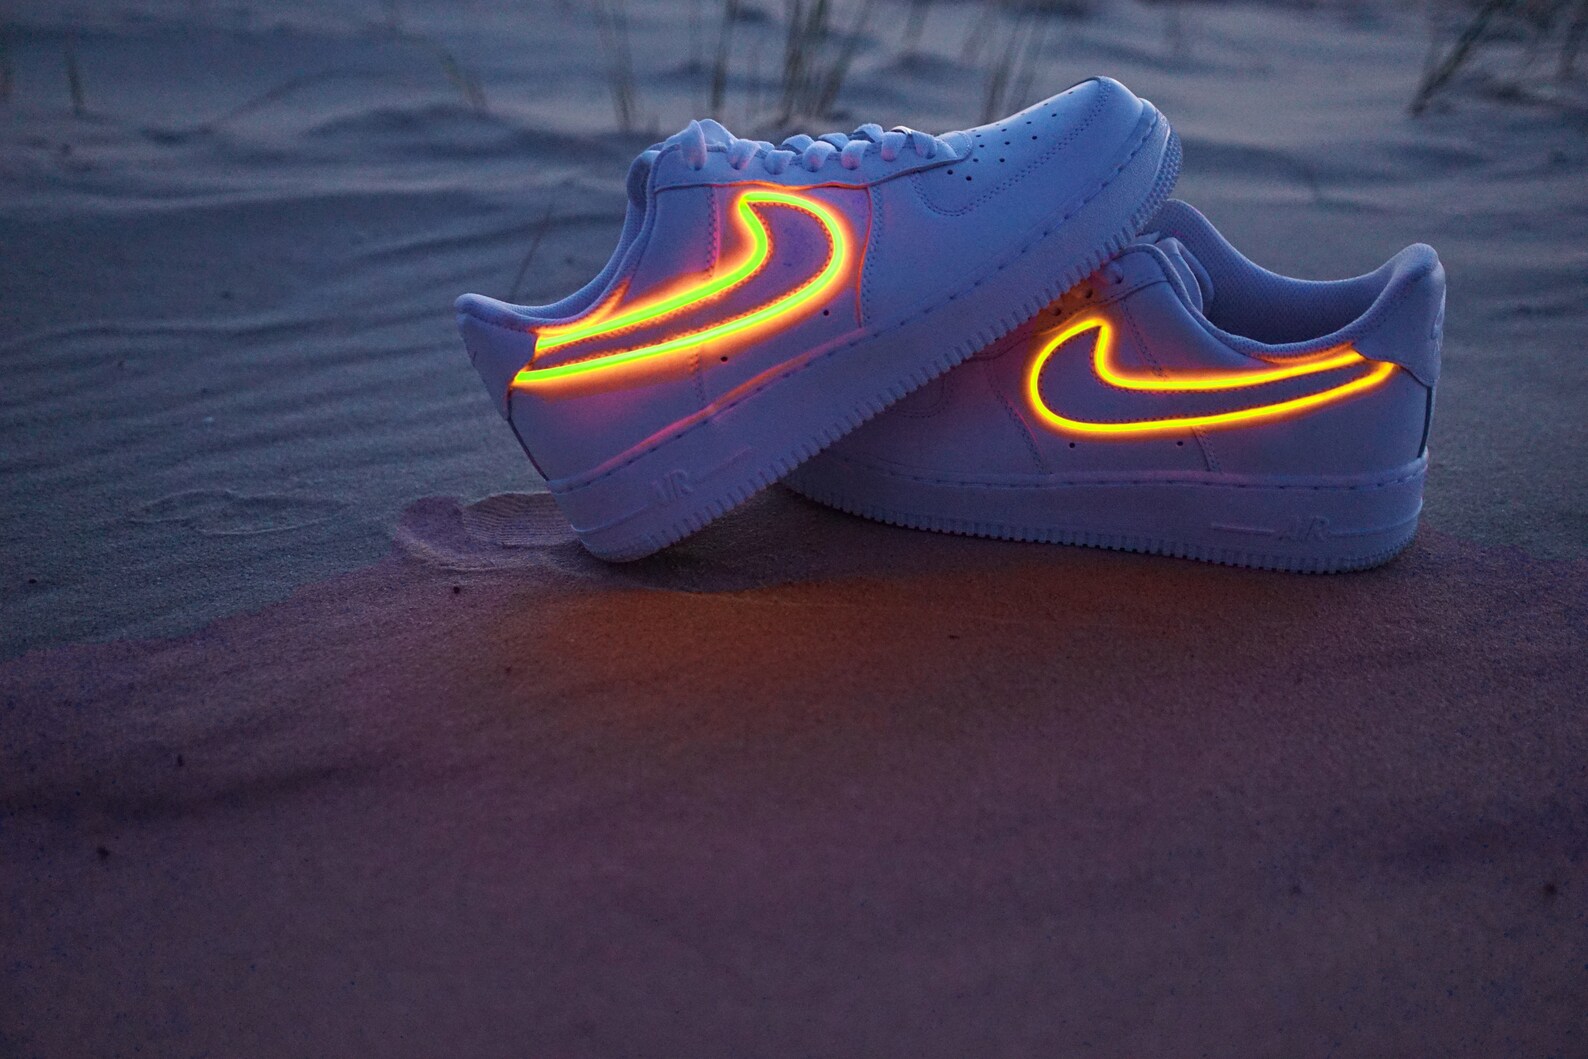 Custom Light Up Nike Air Force 1's07 Electric YELLOW. One | Etsy